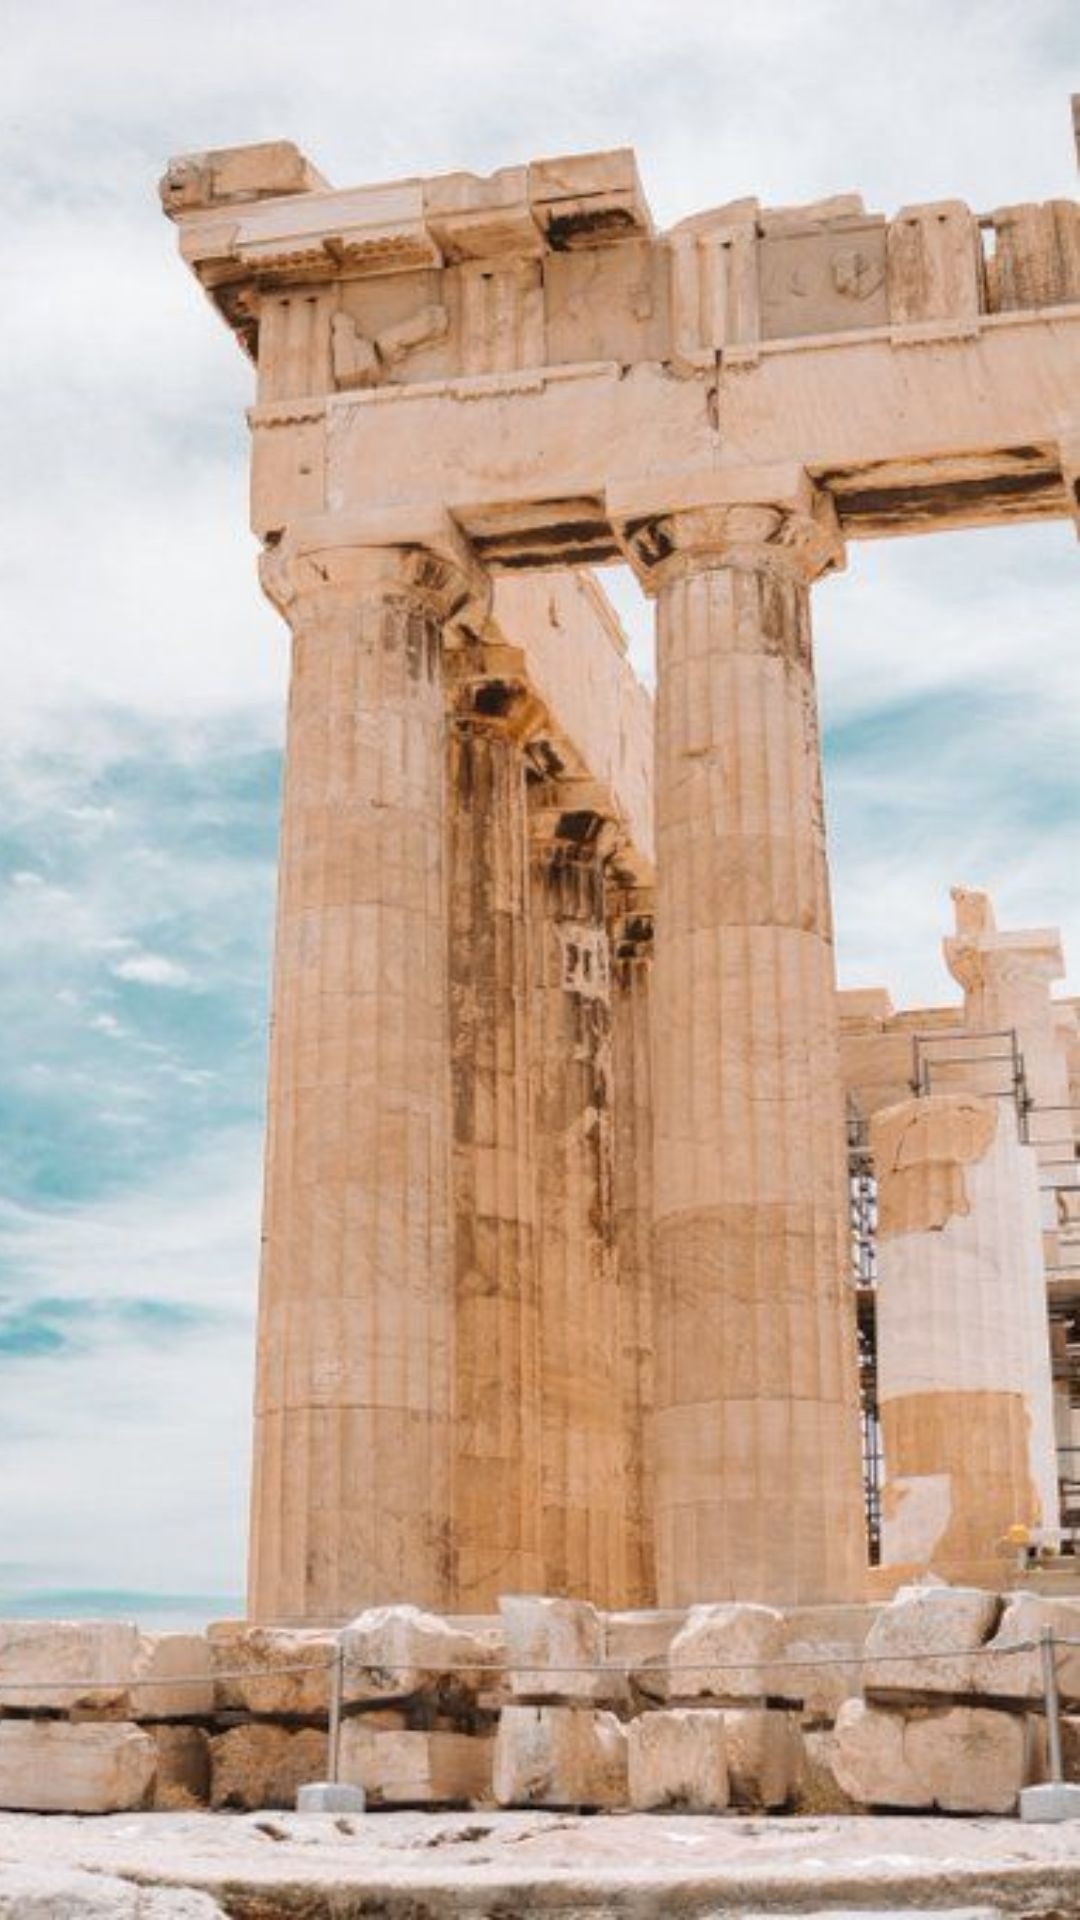 Acropolis wallpapers, Desktop and mobile, Greece's heritage, Historical significance, 1080x1920 Full HD Phone